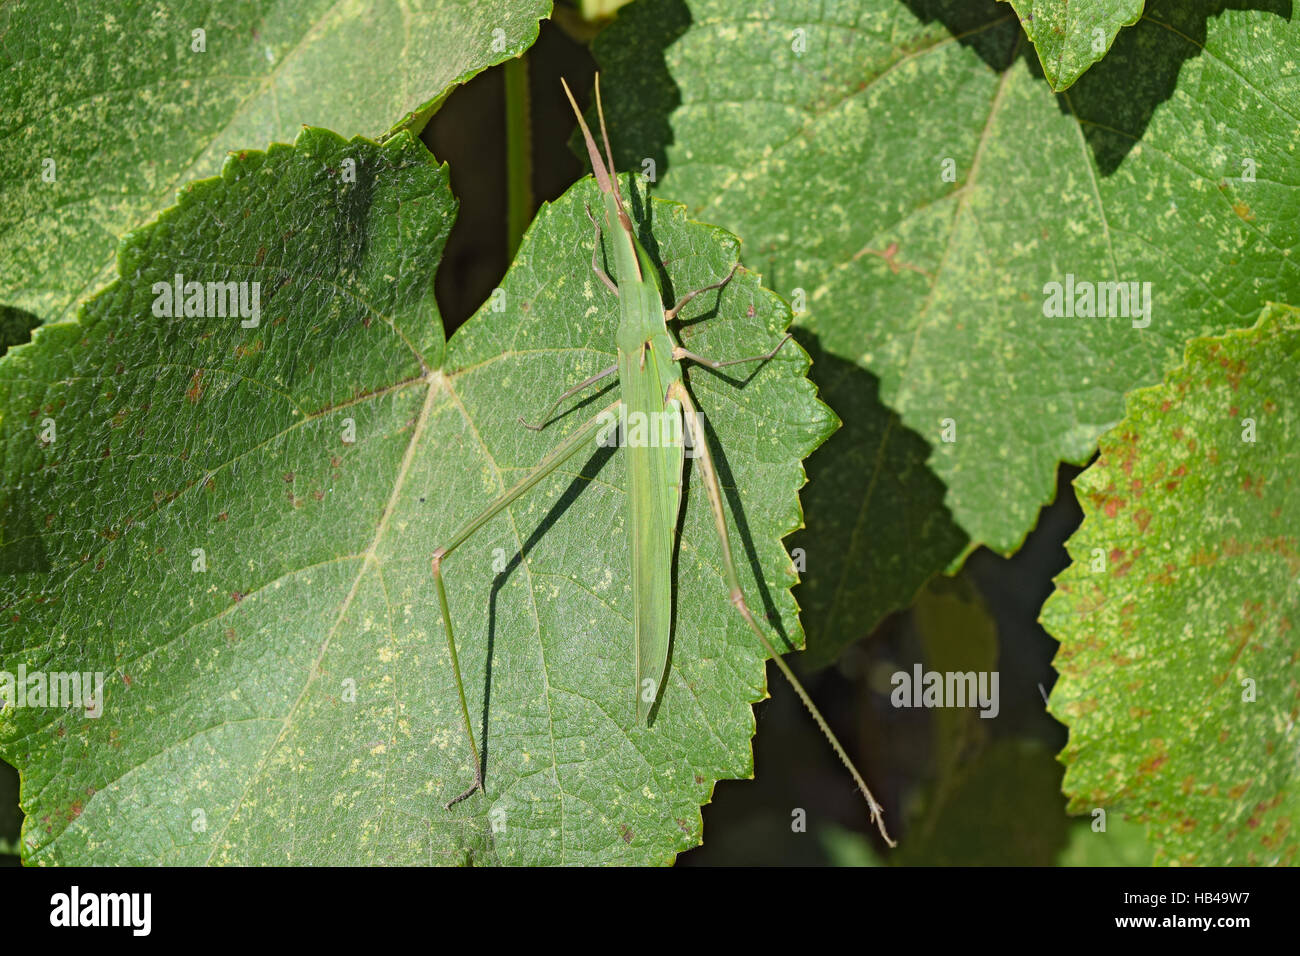 Green locusts, orthoptera insect Stock Photo